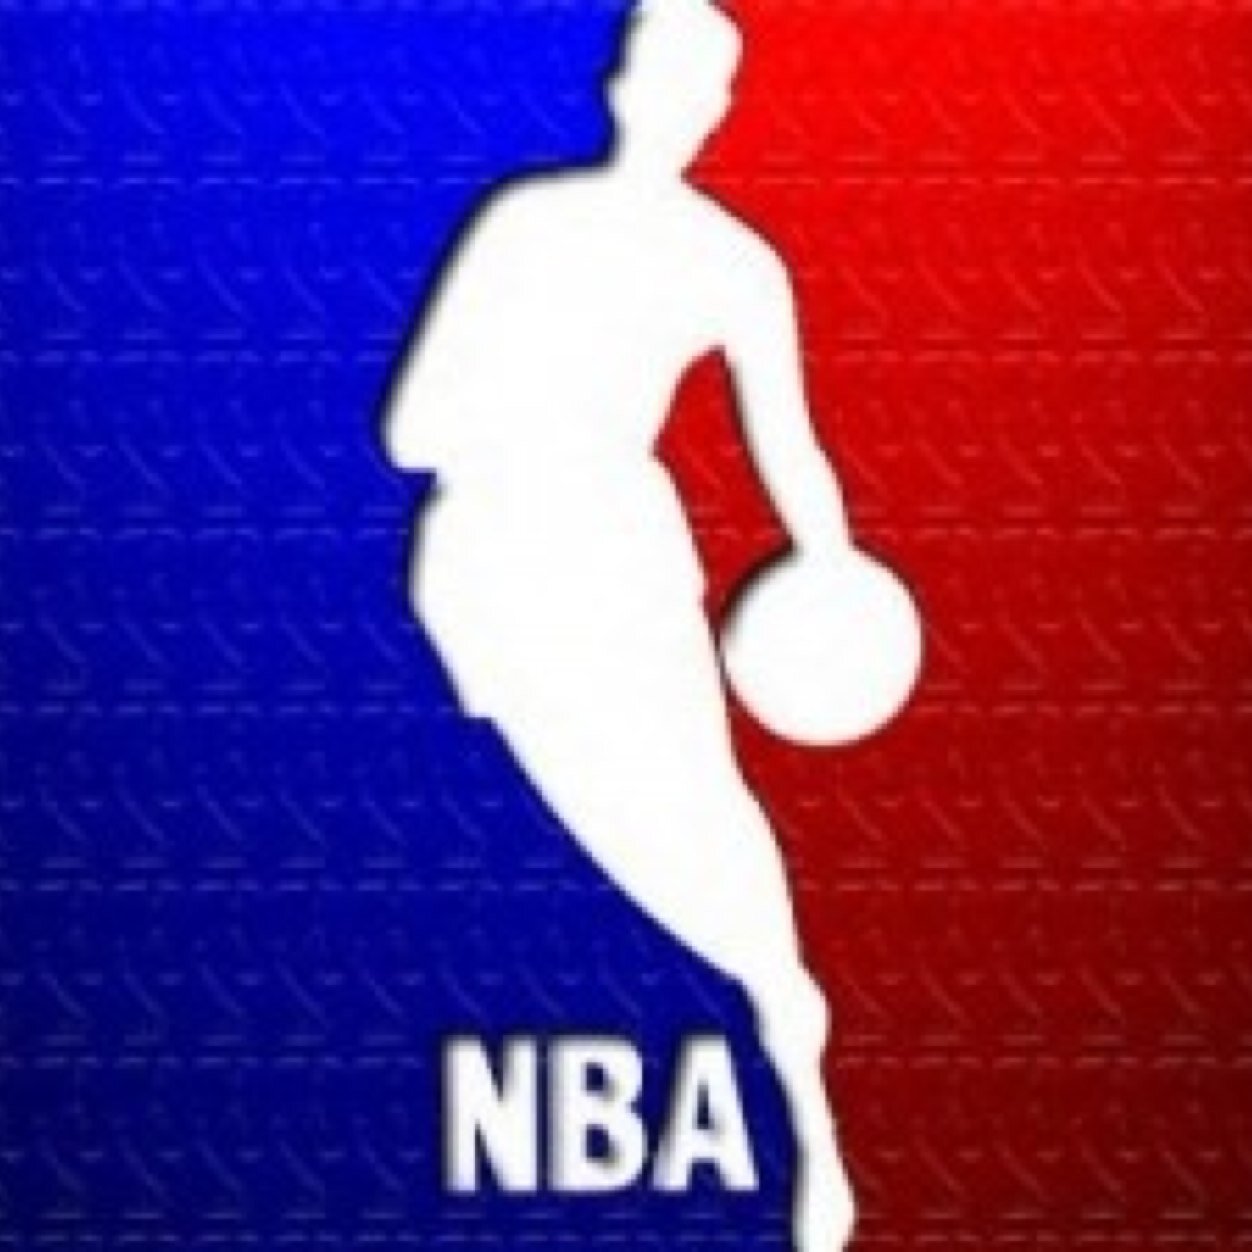 Bringing you updates on all NBA news and Playoff Coverage.